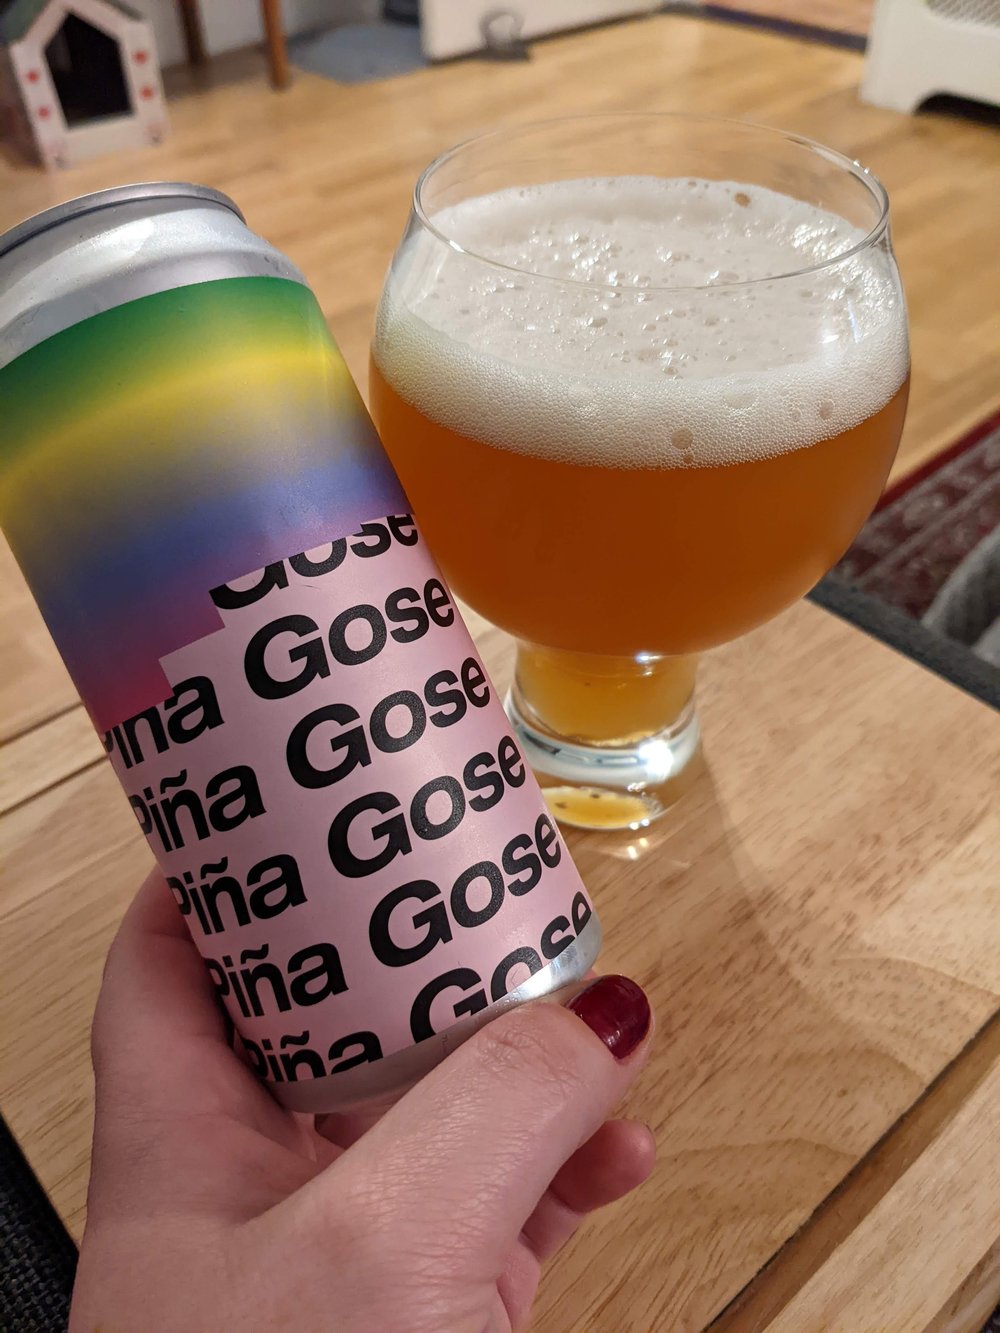 My Beer of the Year - Piña Colada Gose by To Øl